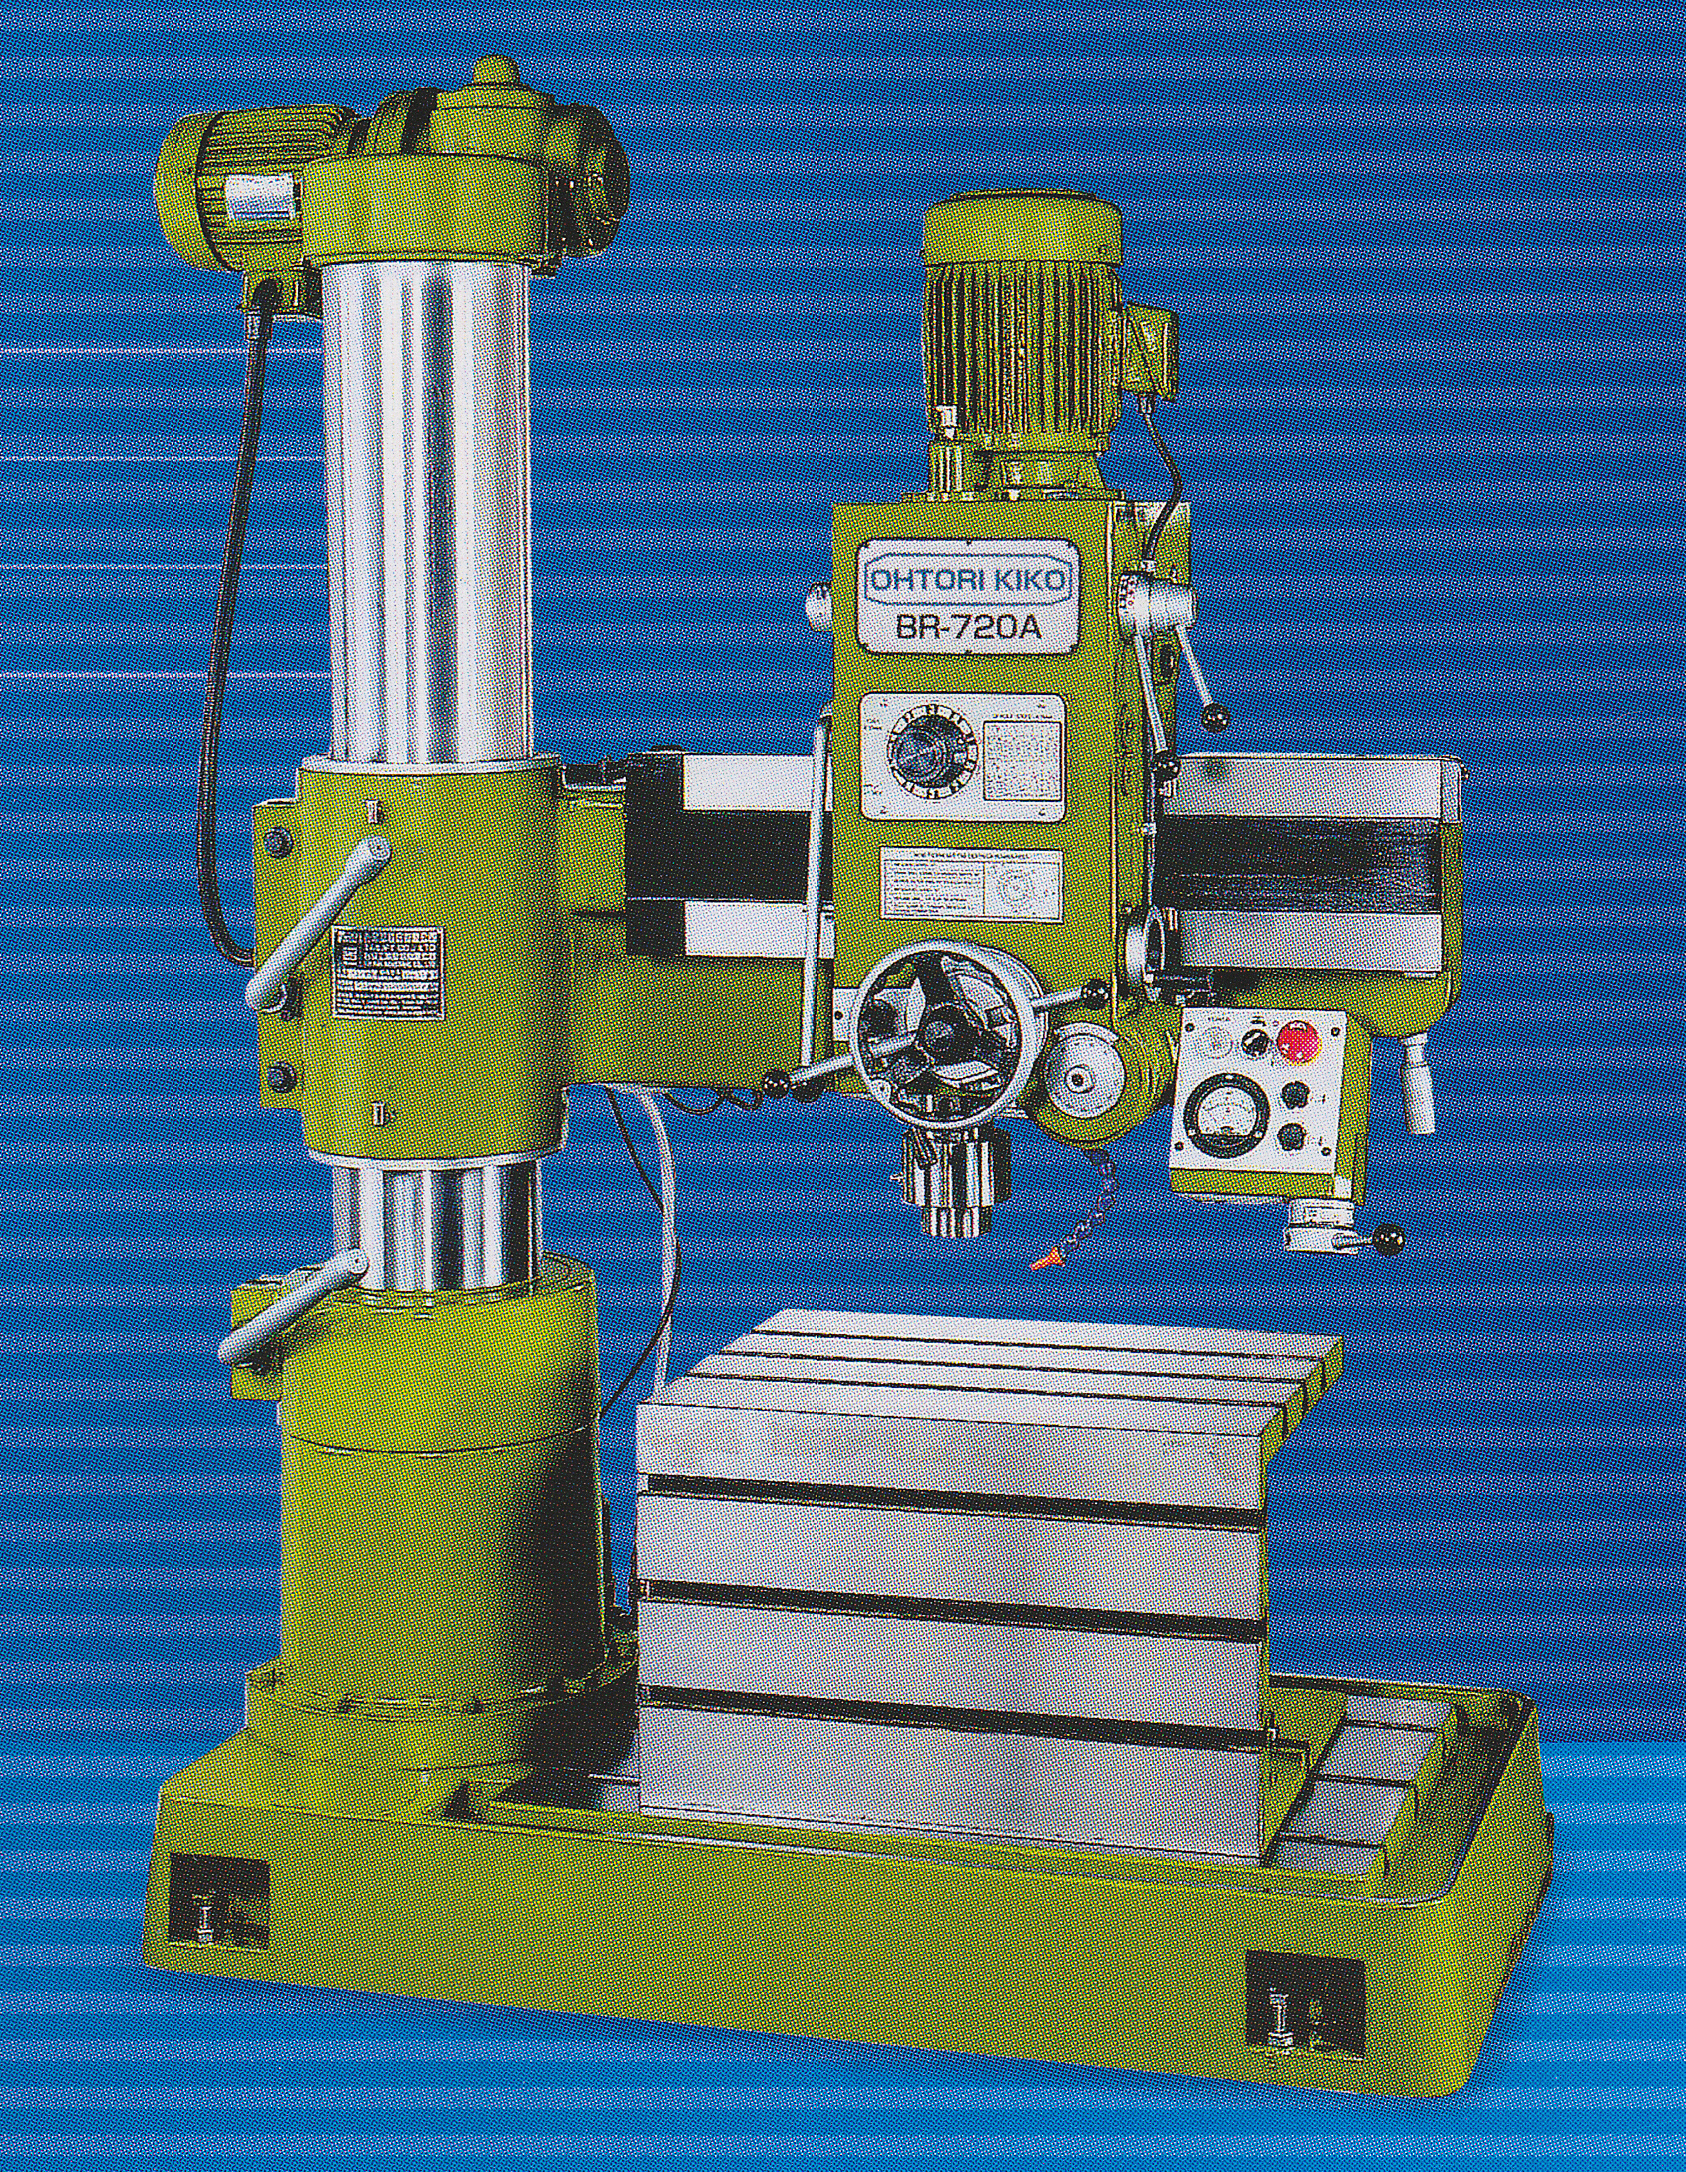 Radial Drilling Machine BR-720A